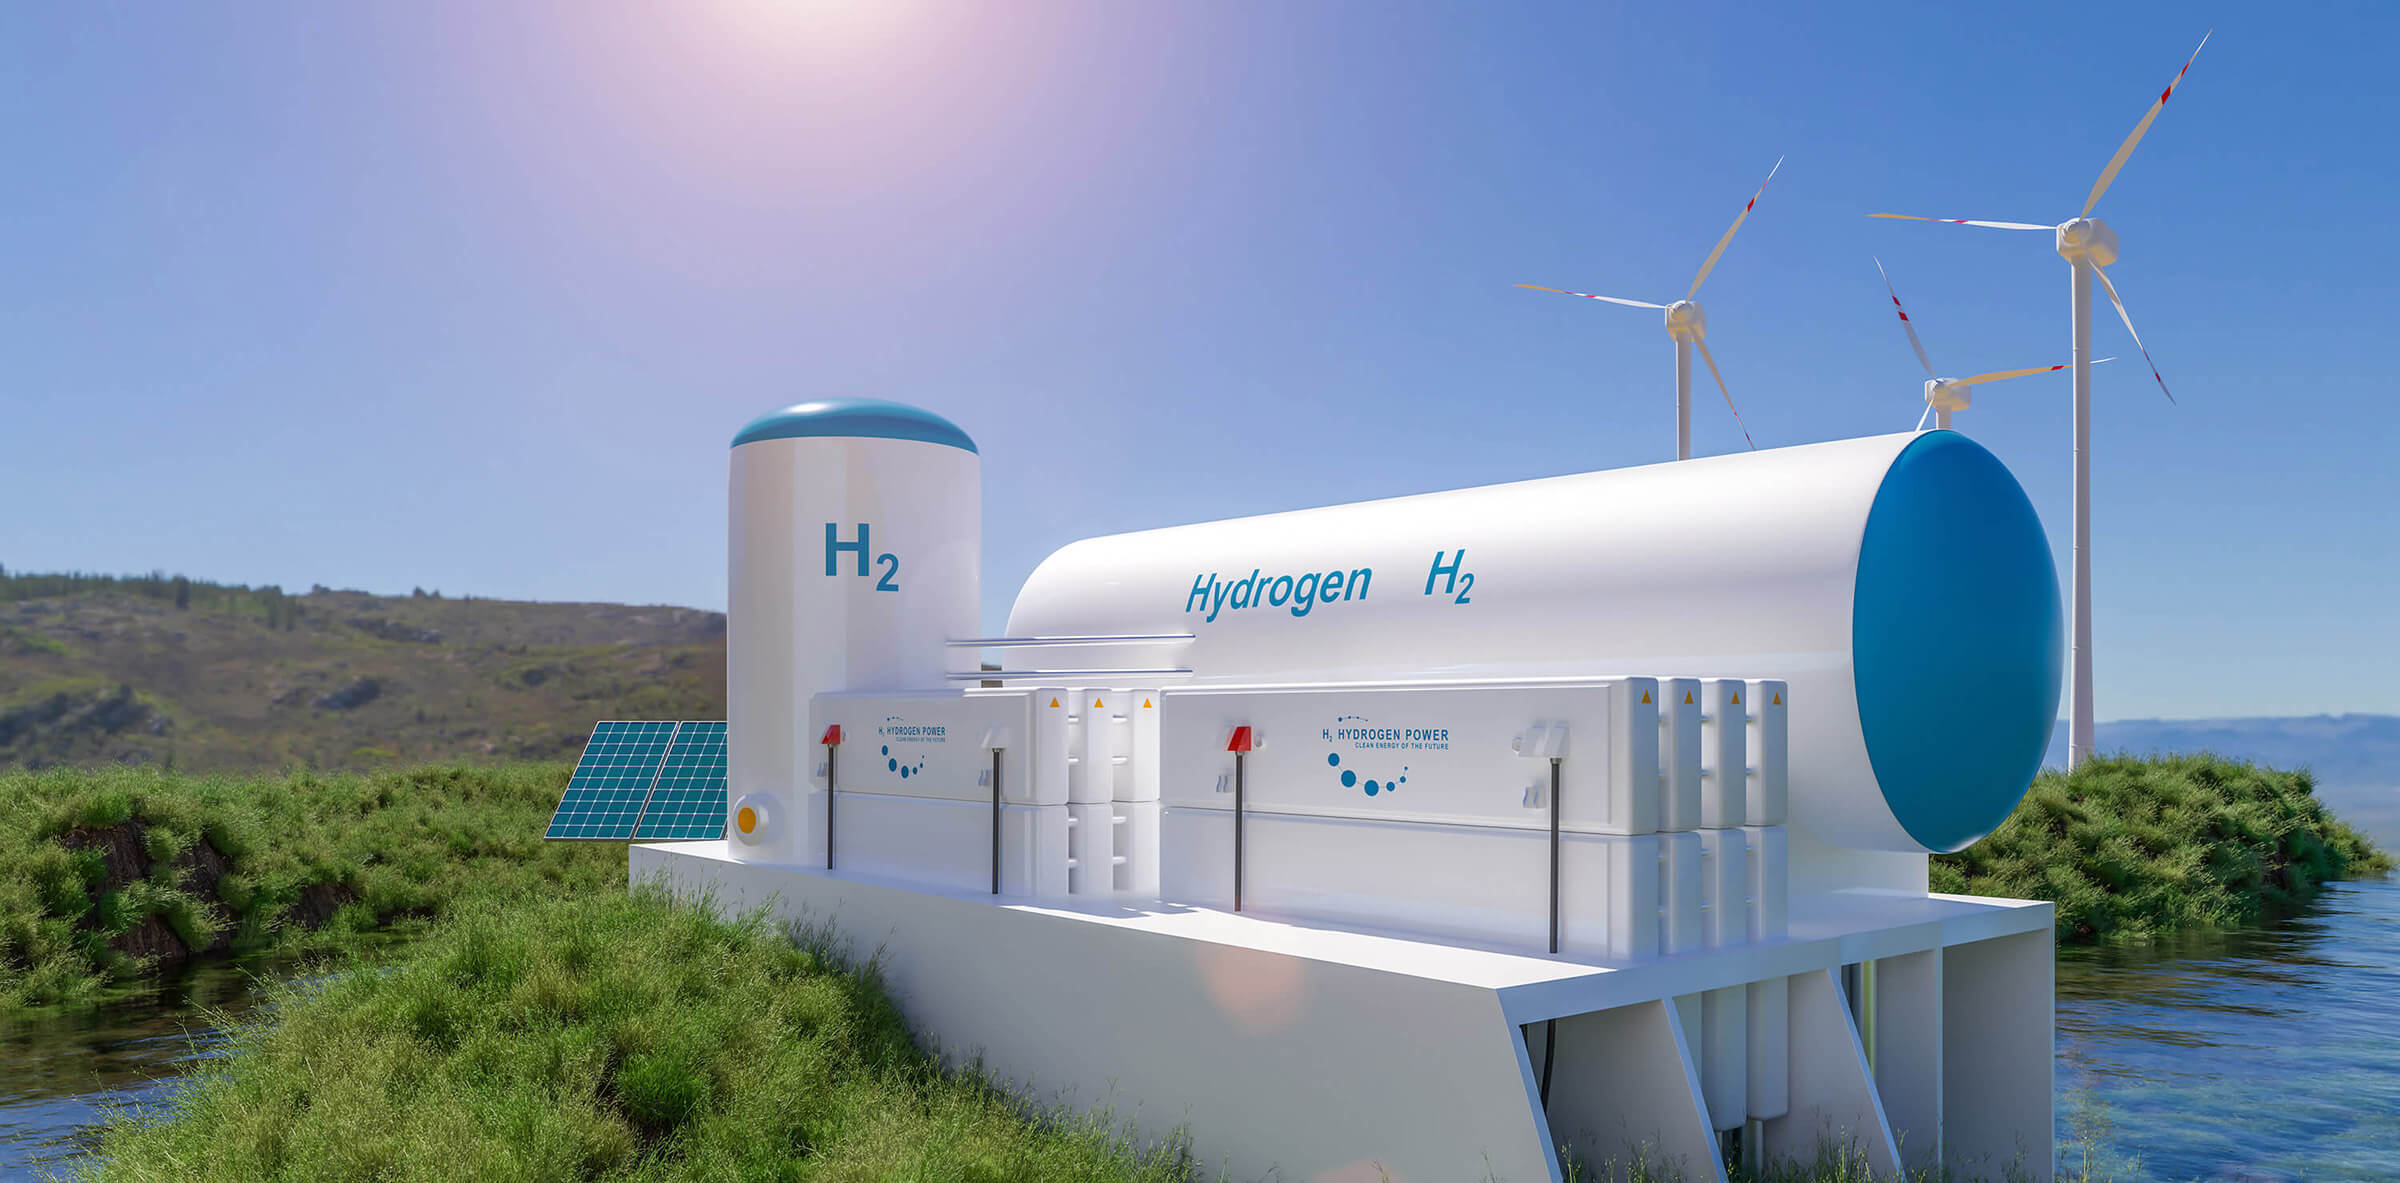 World's first fuel-cell hydrogen process analysis solution from ASDevices